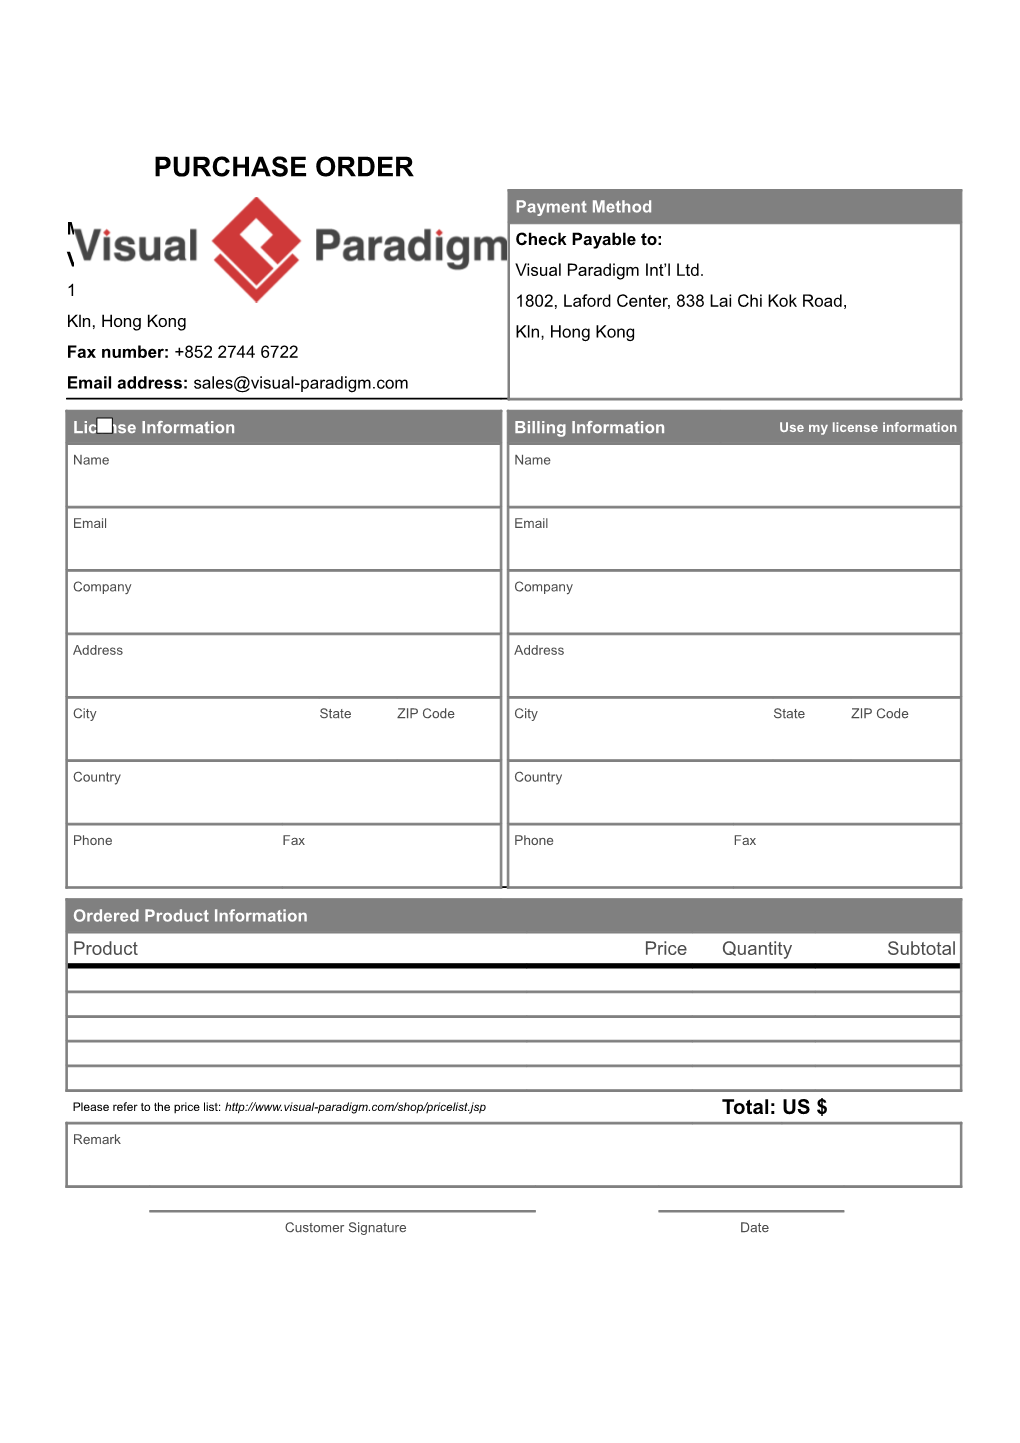 Offline Purchase Order Form for Payment by Check